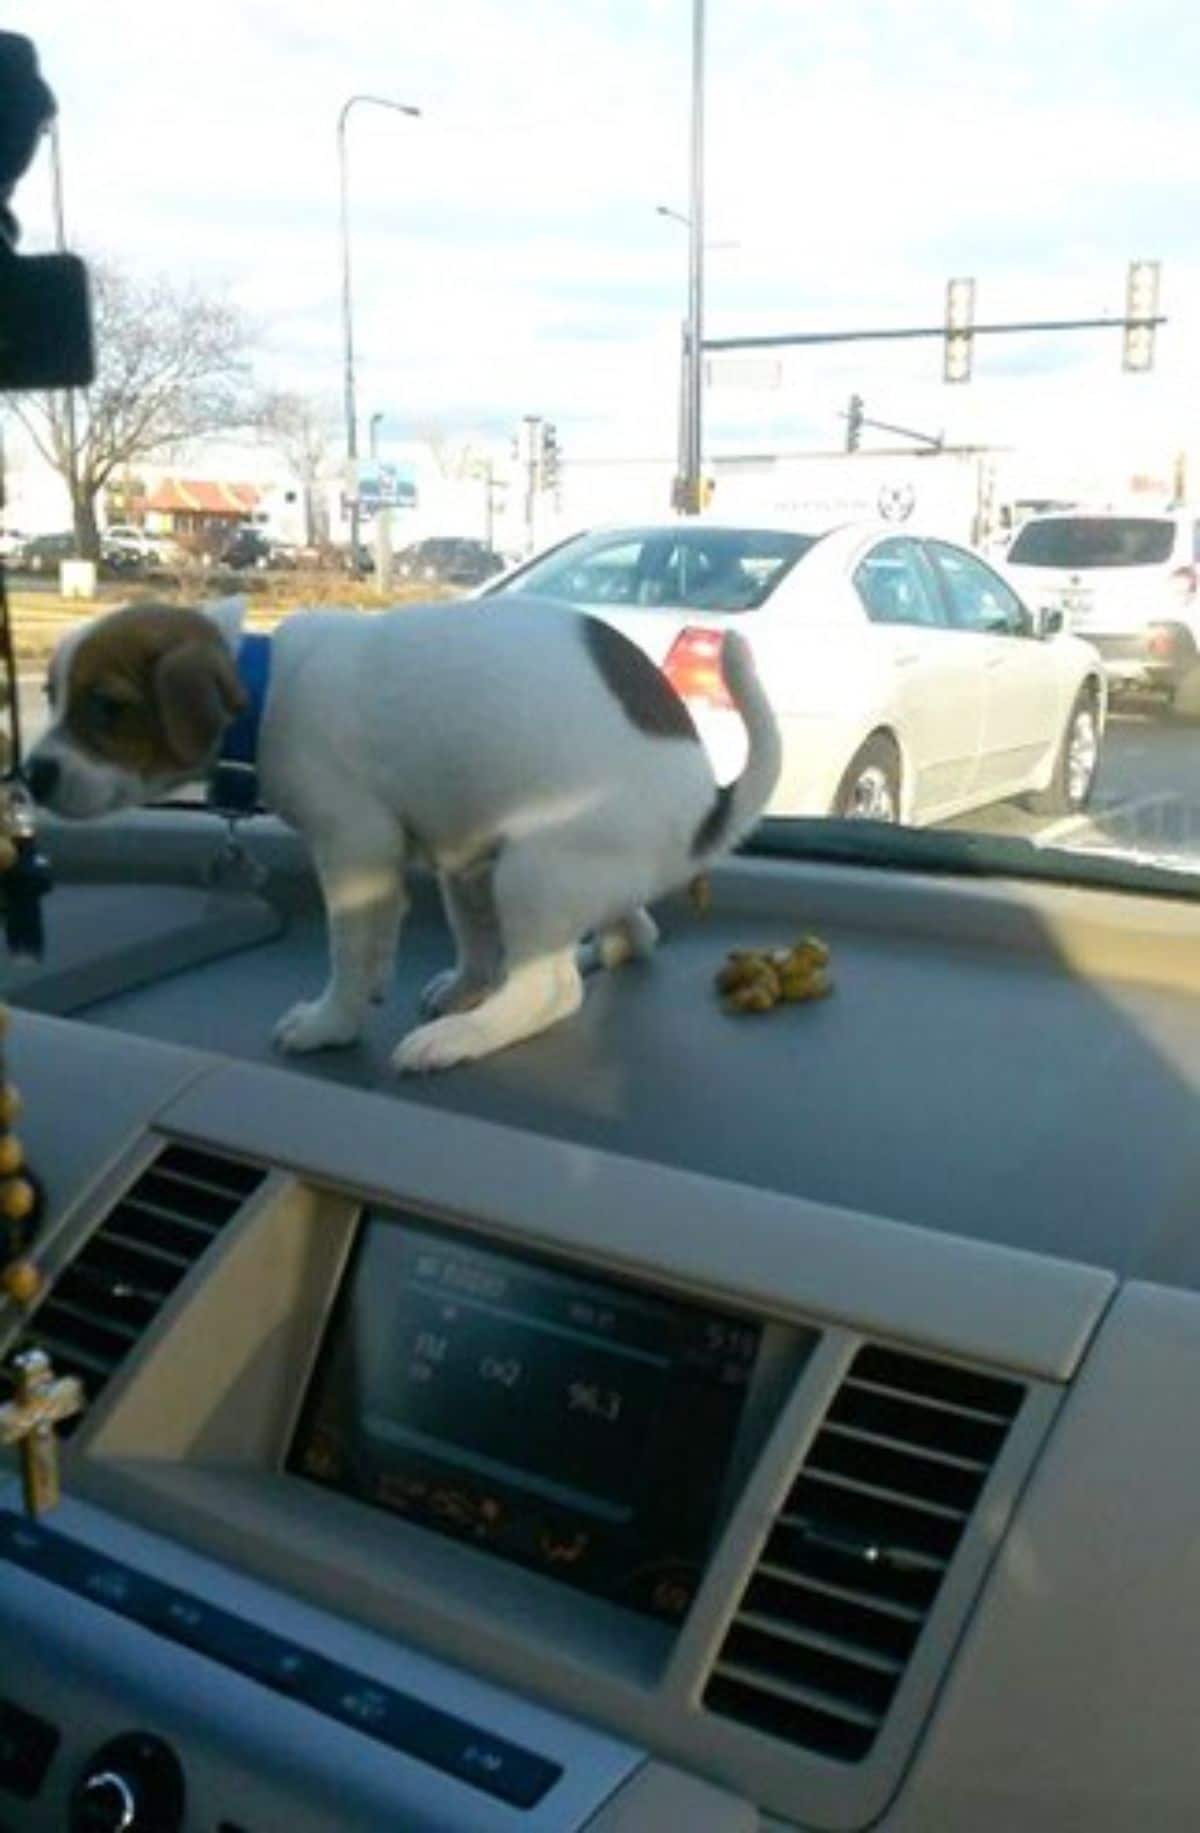 brown and white puppy pooping on the dashboard of a vehicle